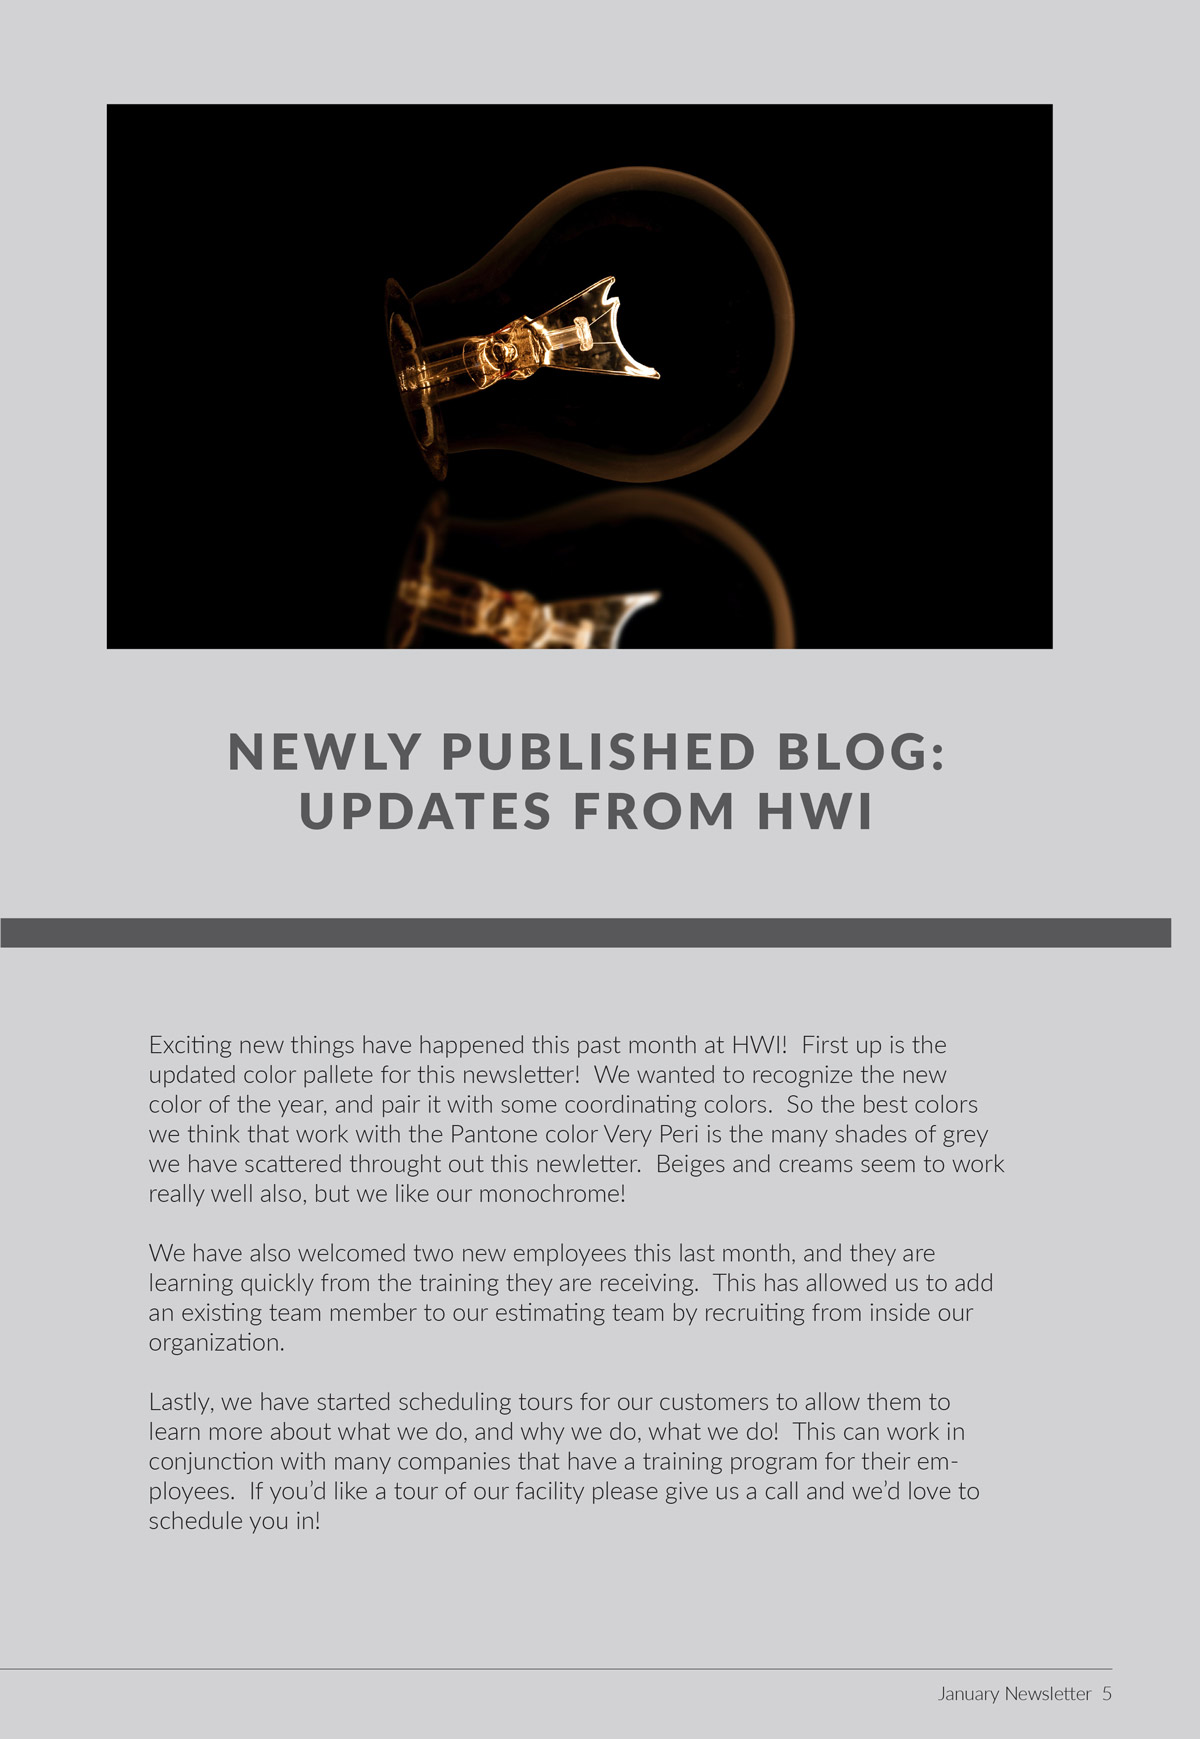 New published blog: updates from HWI